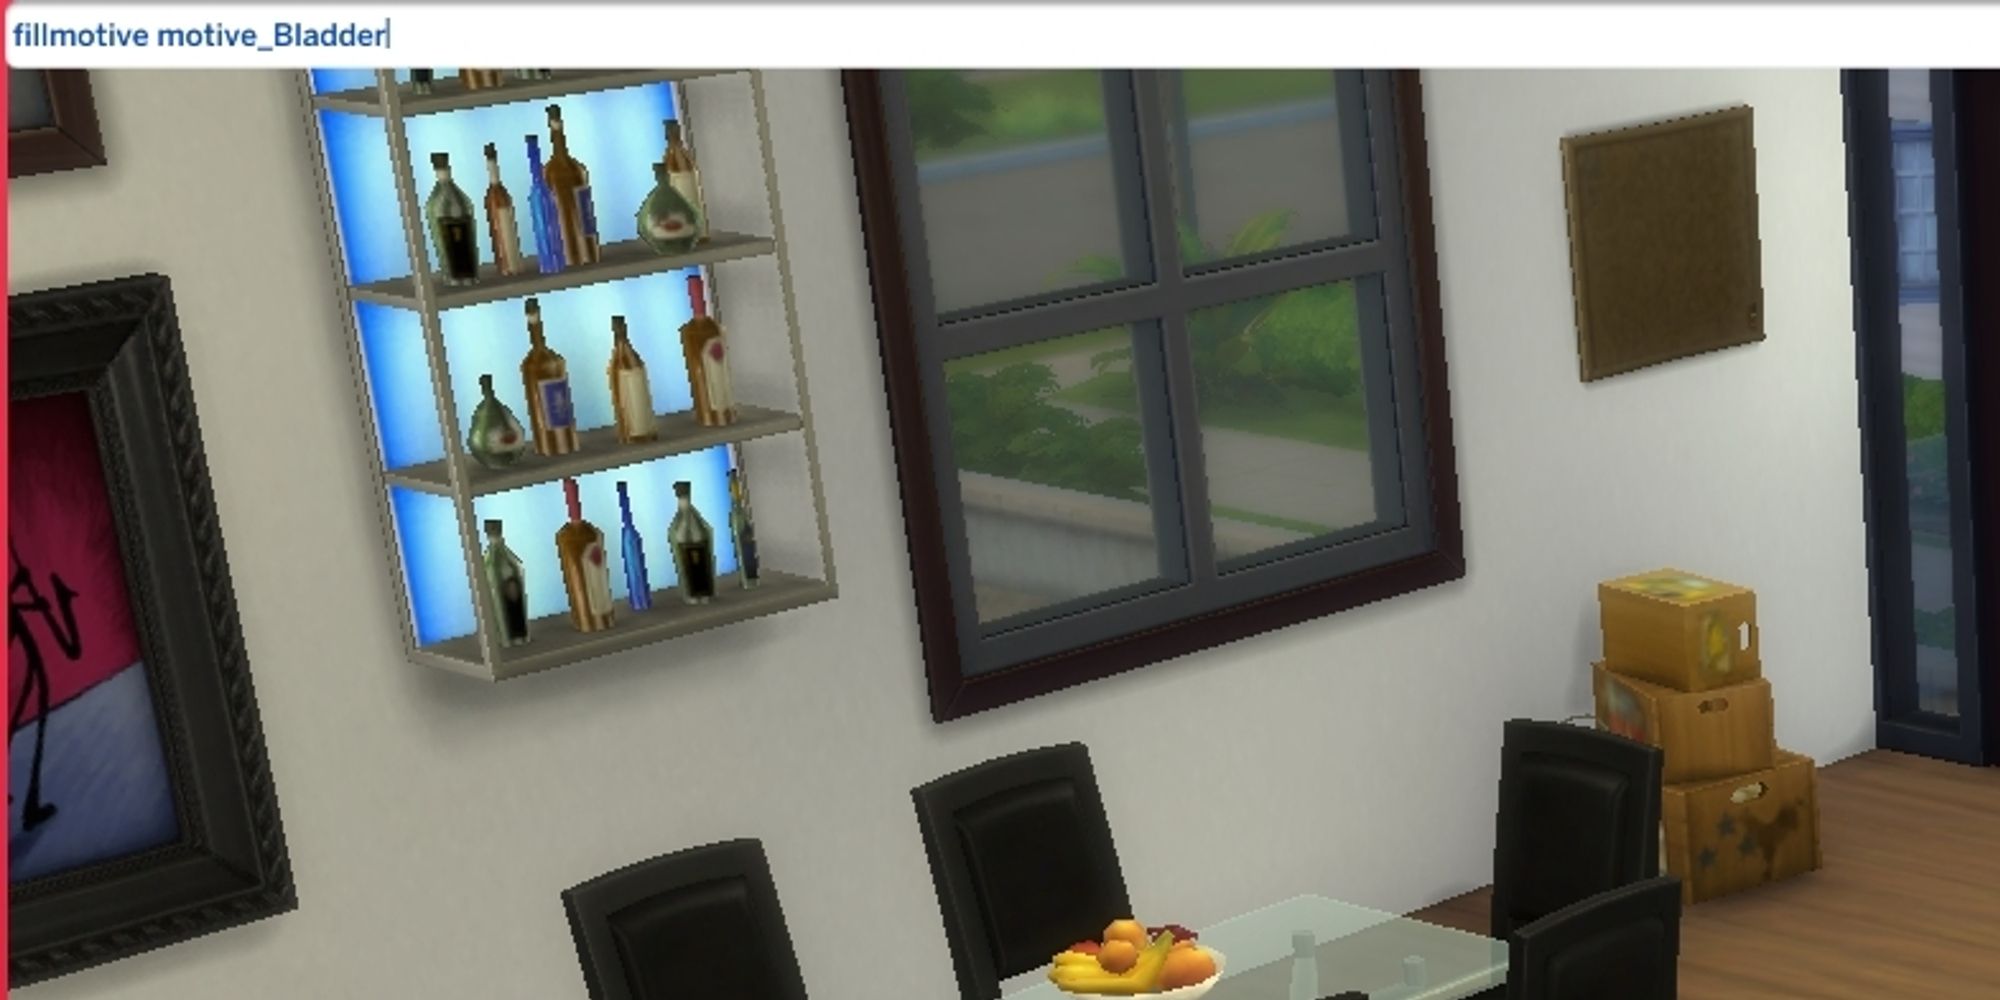 sims 4 cheat to fill bladder need